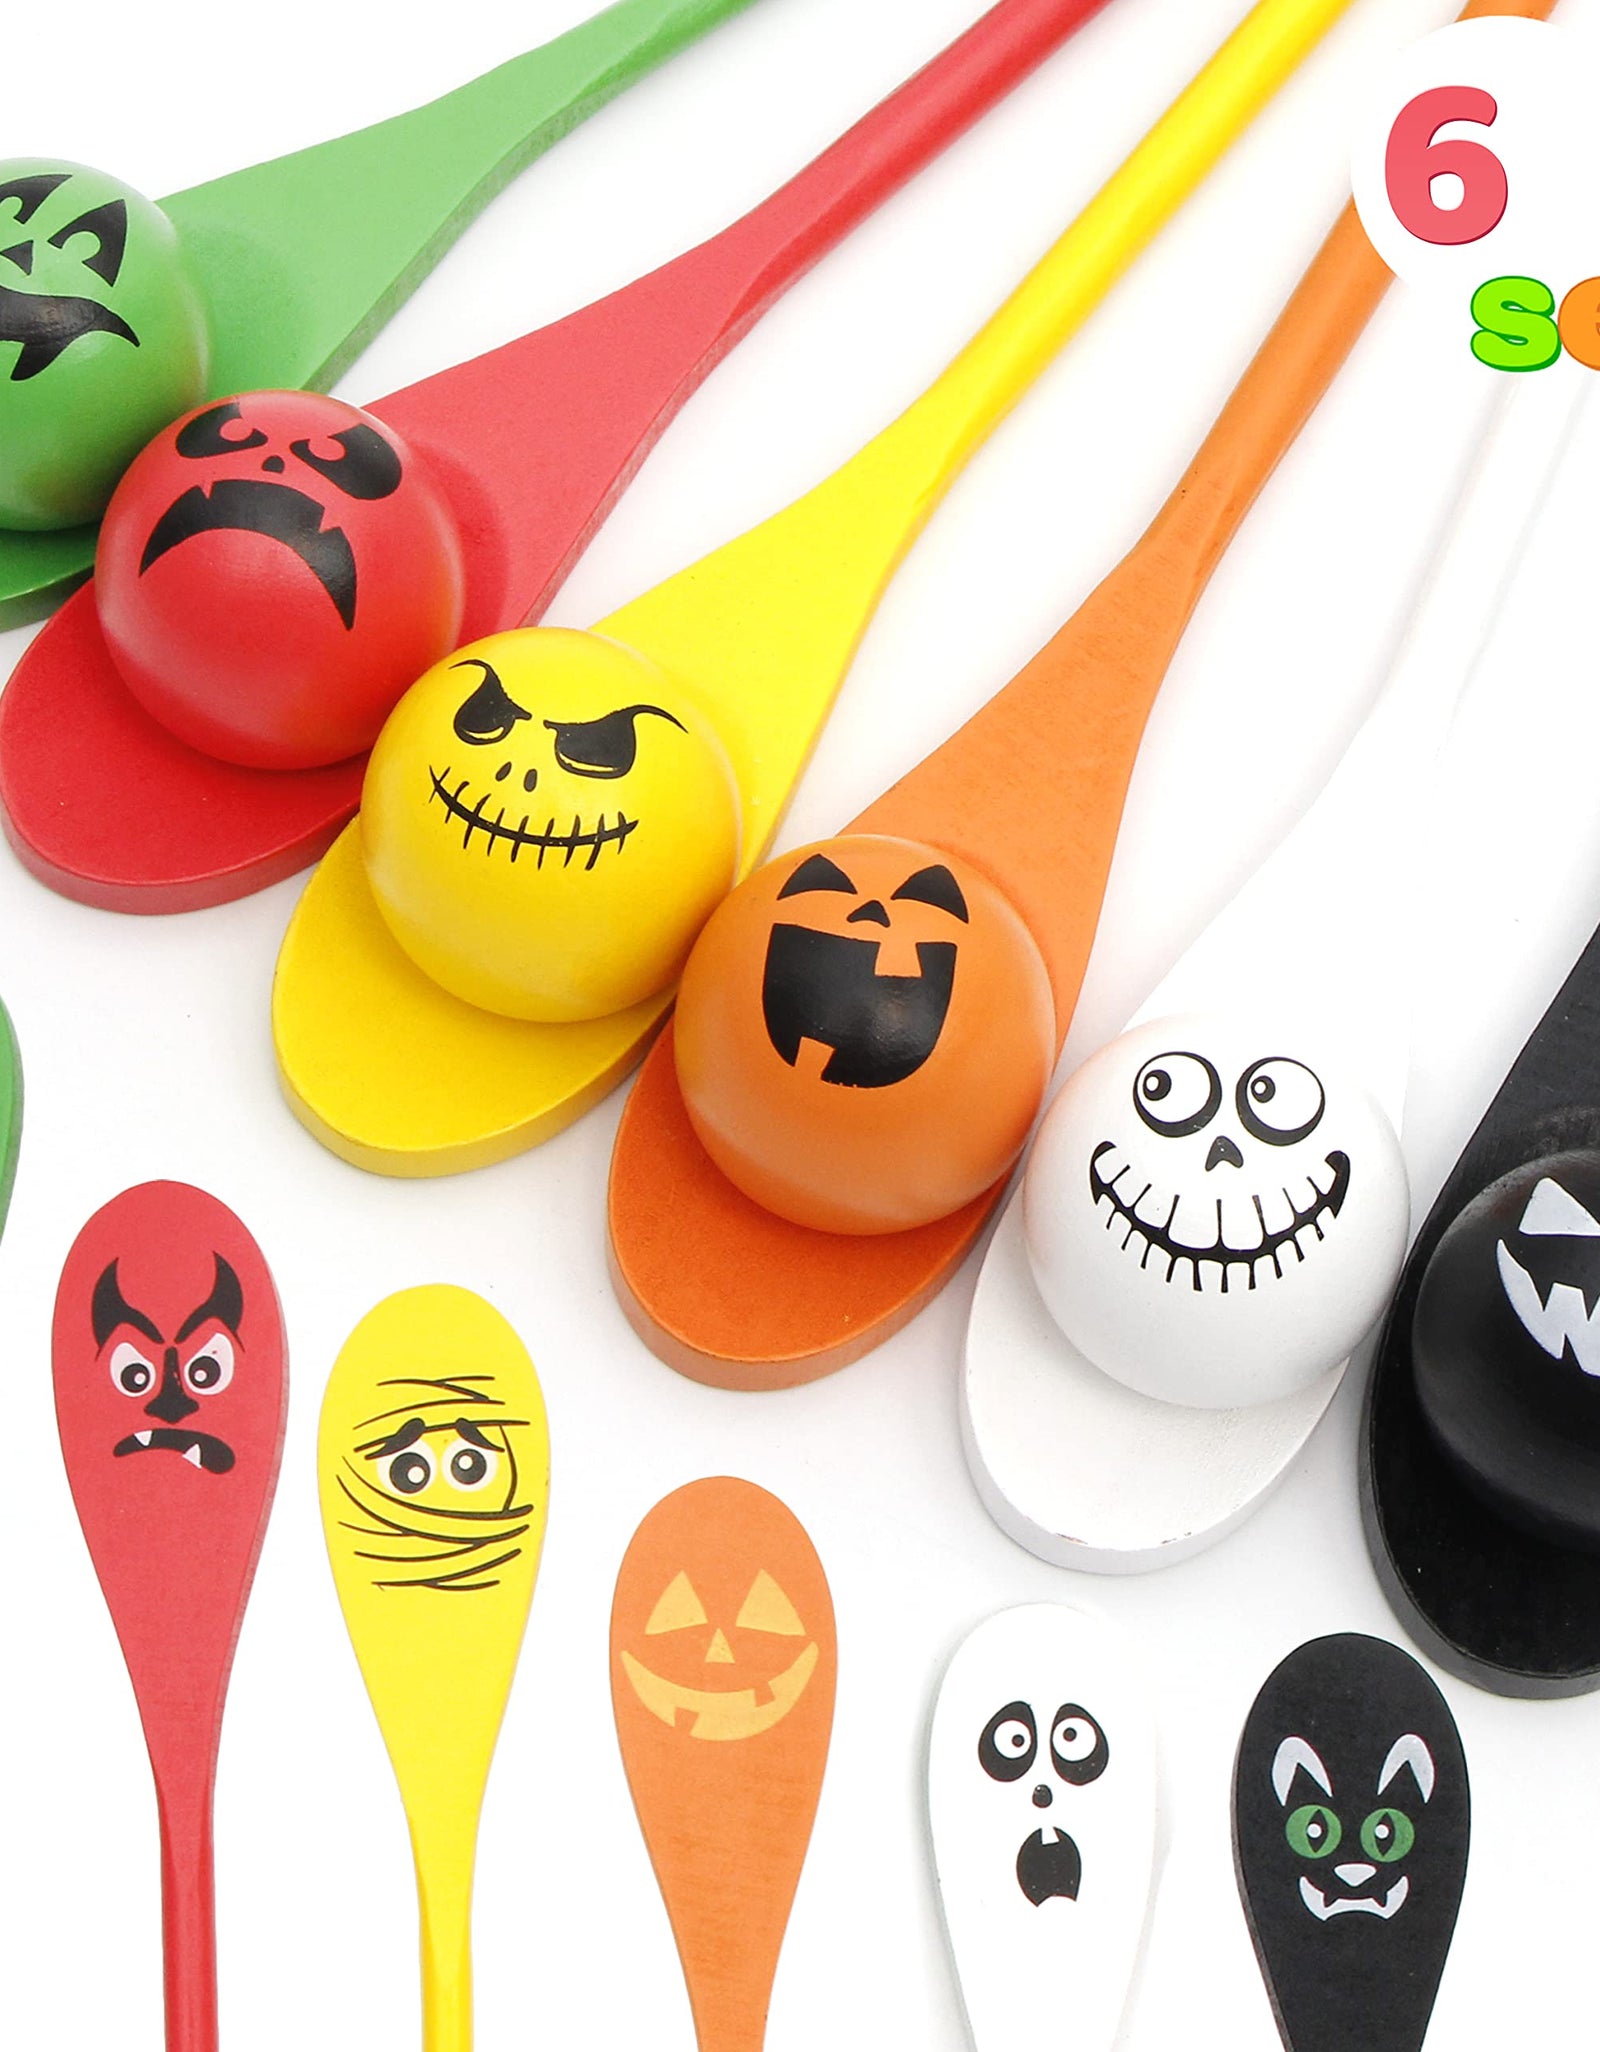 JOYIN 6 Pcs Halloween Egg and Spoon Race Game Set; Eyeballs and Spoons with Assorted Colors for Kids and Adults Halloween Outdoor Fun Games, Party Favor Supplies, Classroom Activities